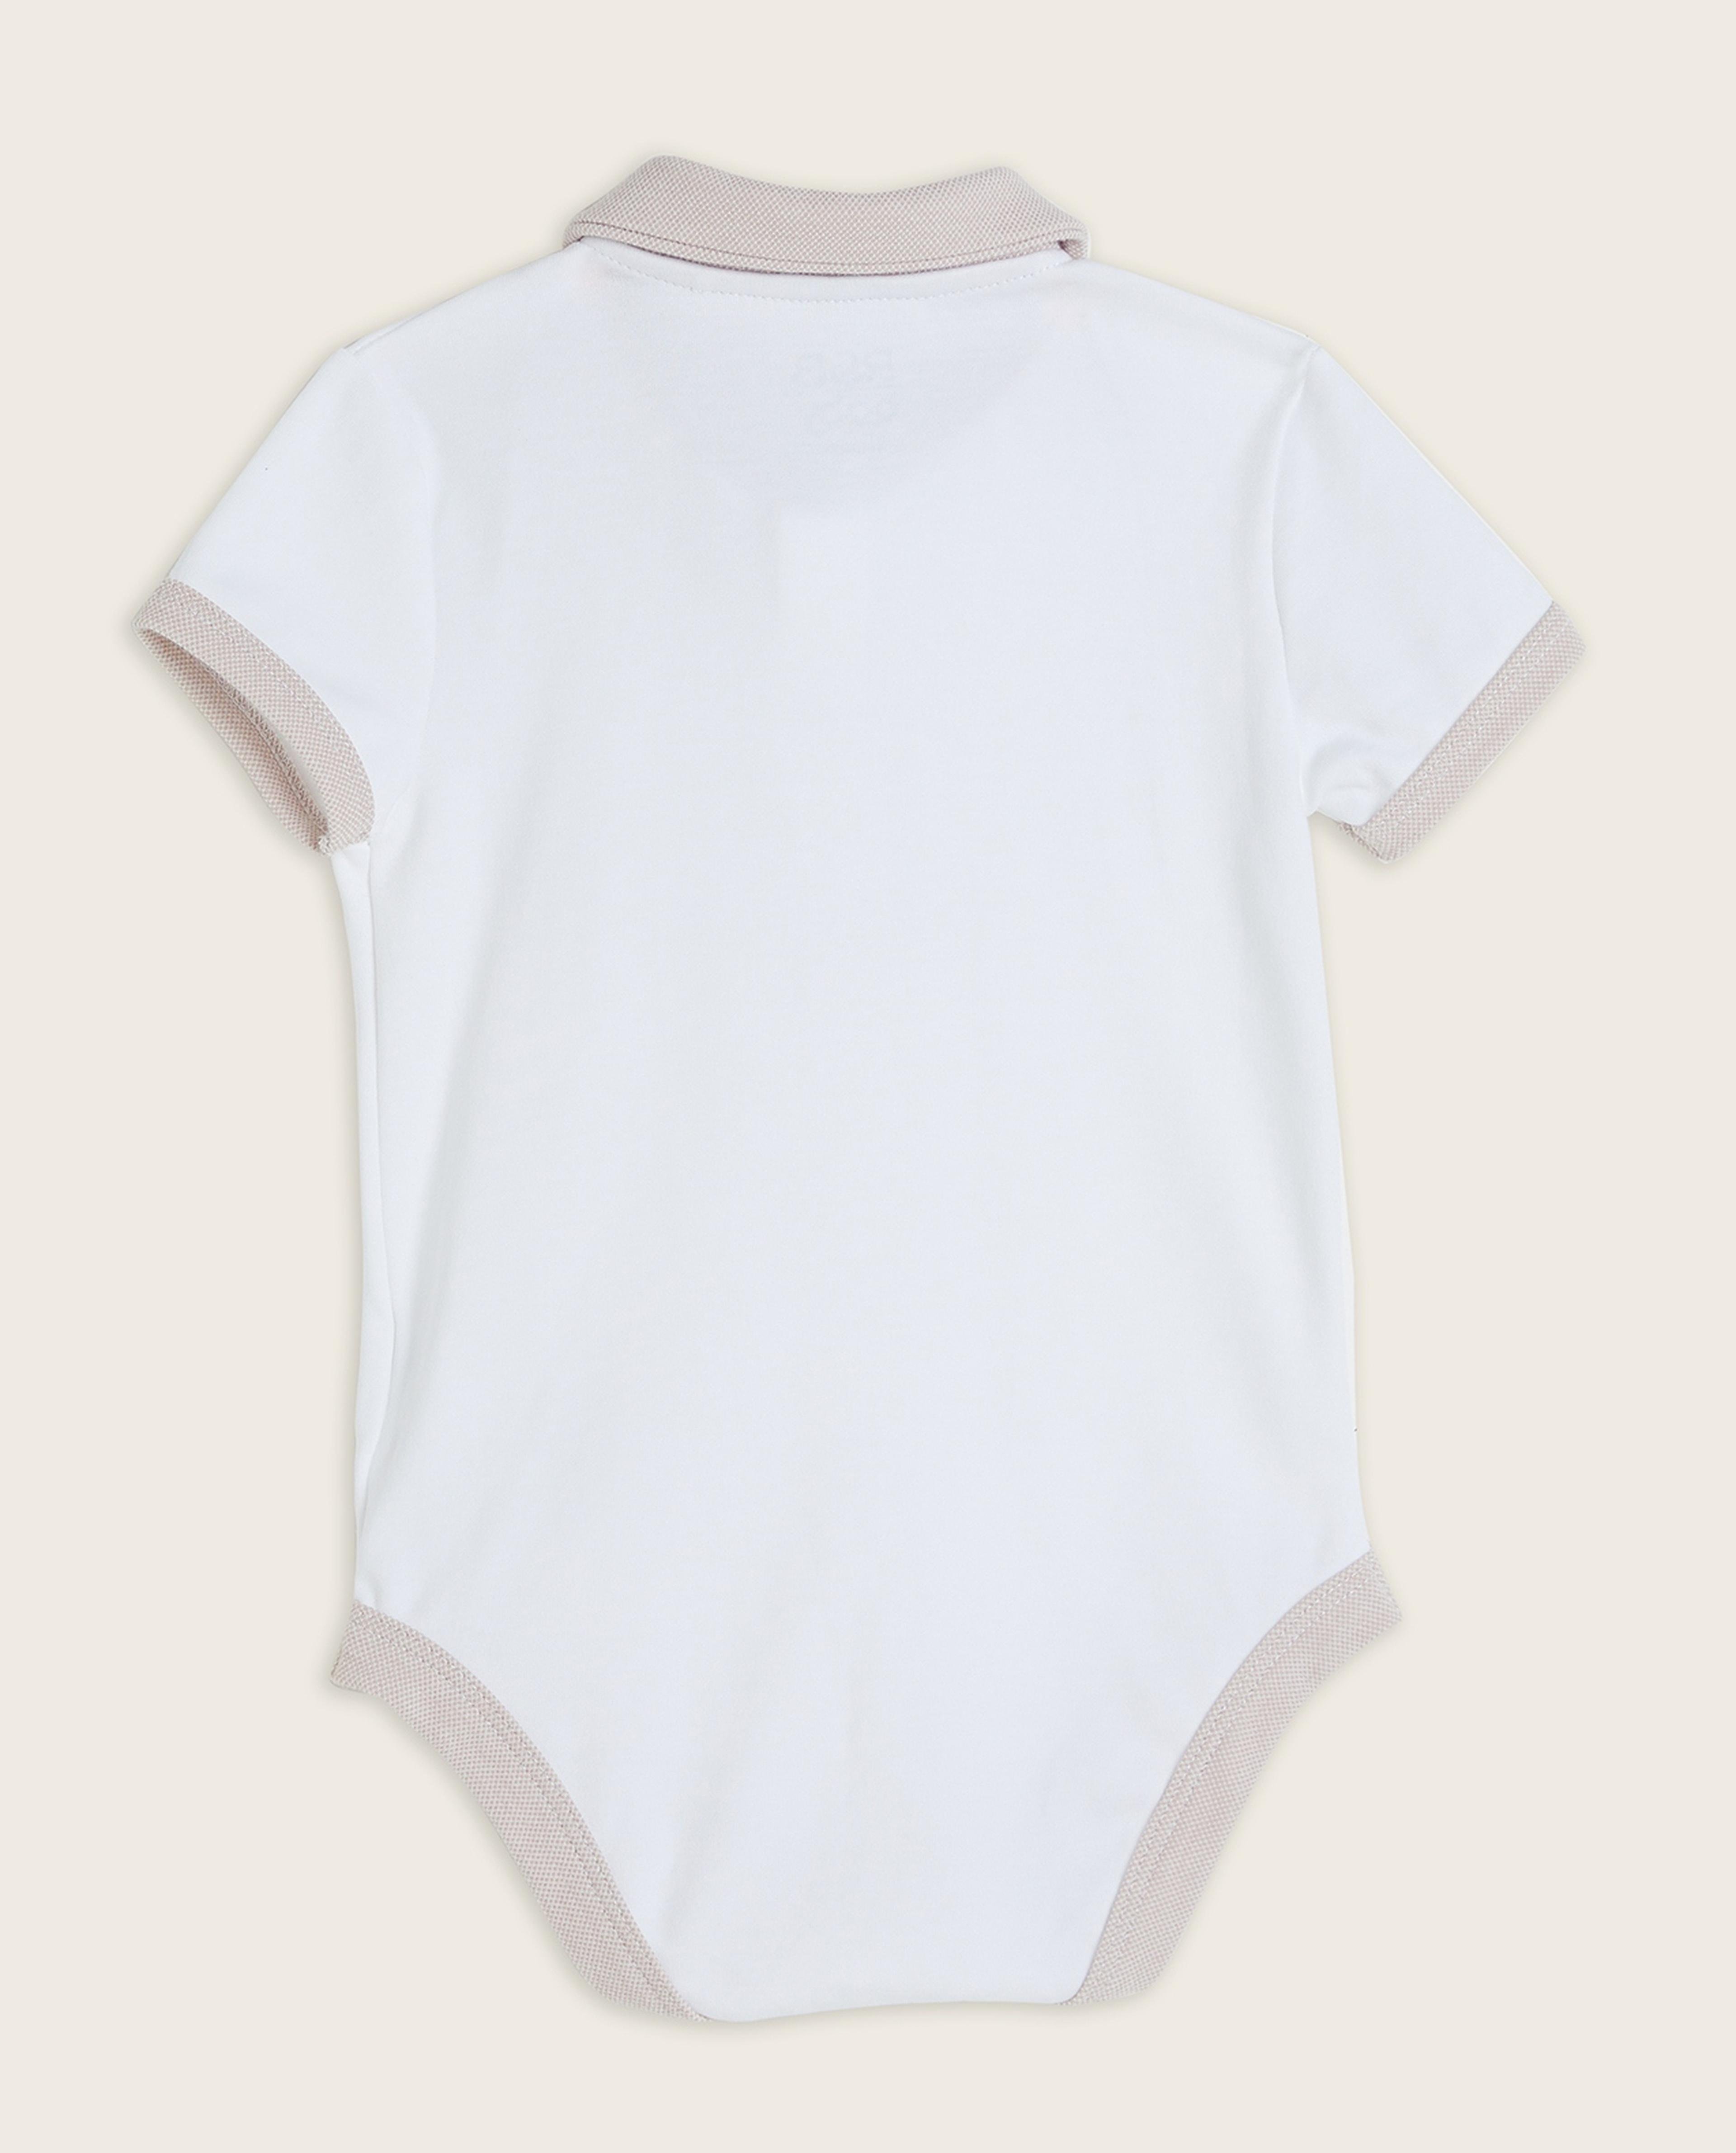 Contrast Trim Bodysuit with Classic Collar and Short Sleeves